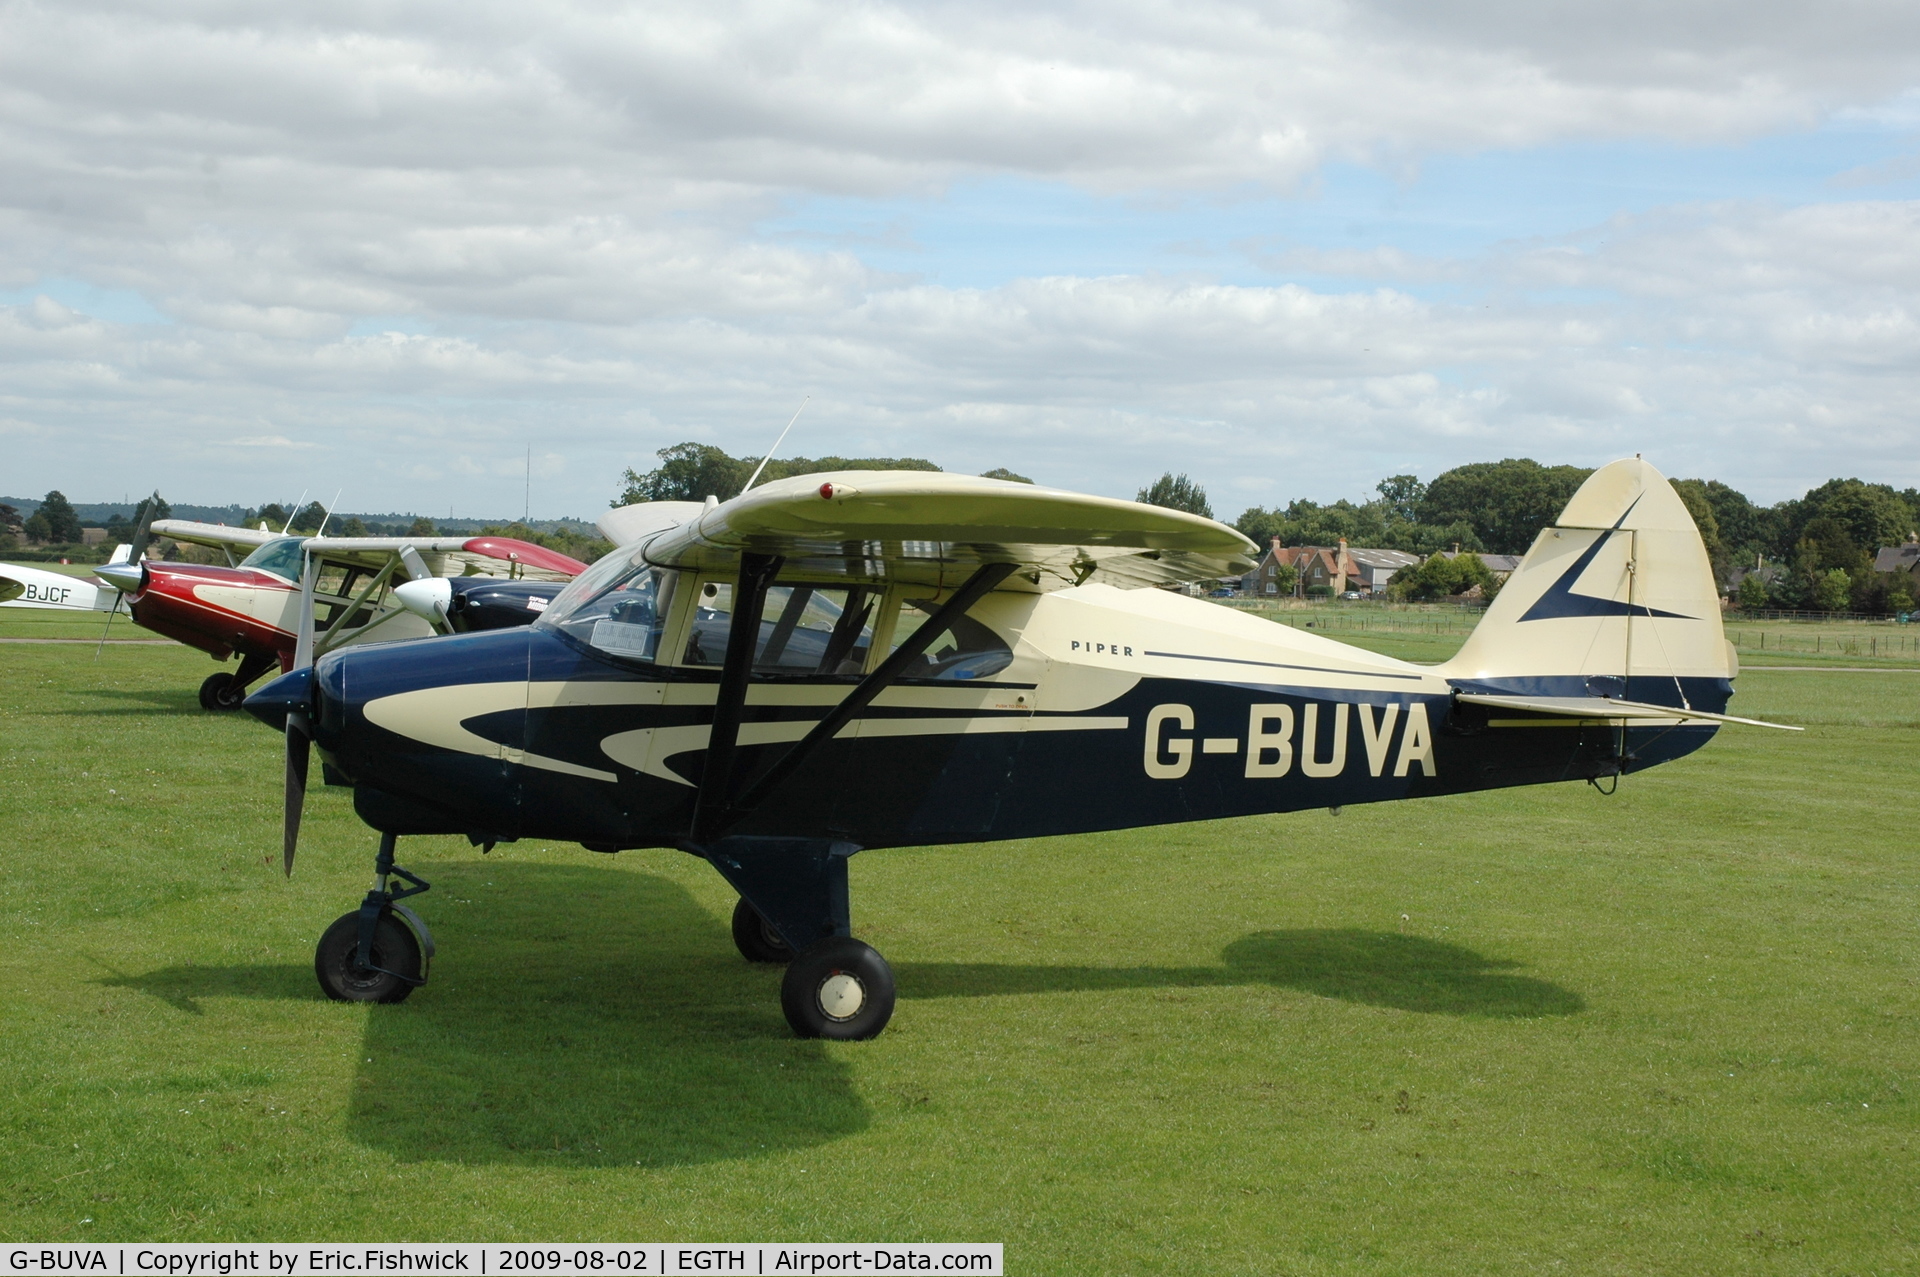 G-BUVA, 1959 Piper PA-22-135 Tri-Pacer C/N 22-1301, G-BUVA at Shuttleworth Military Pagent Air Display Aug 09